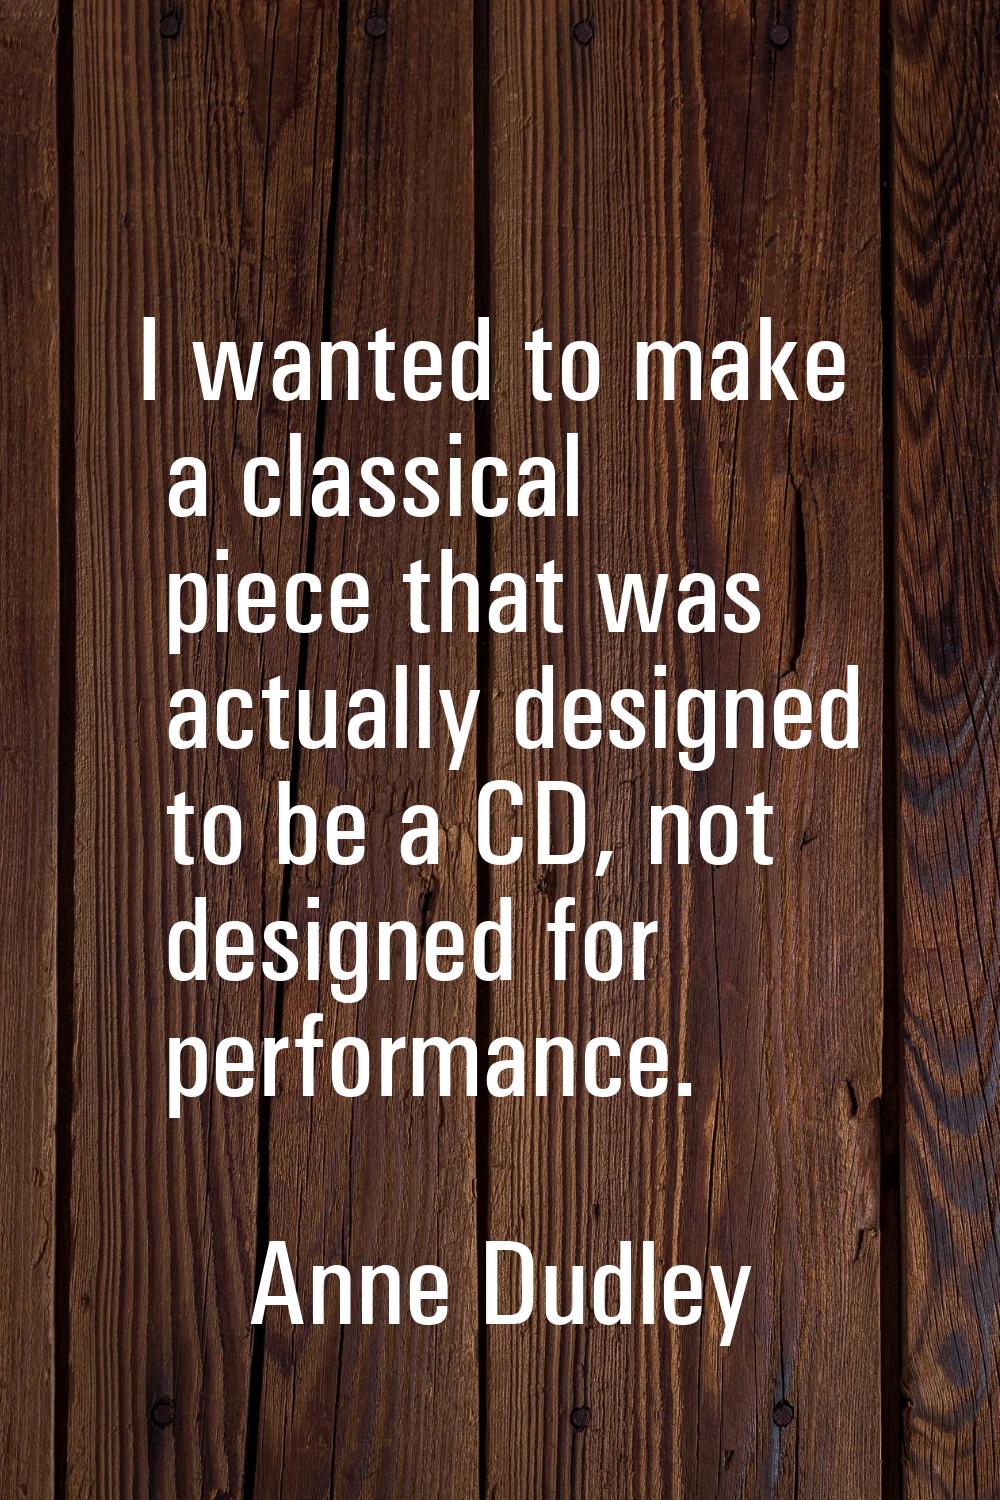 I wanted to make a classical piece that was actually designed to be a CD, not designed for performa